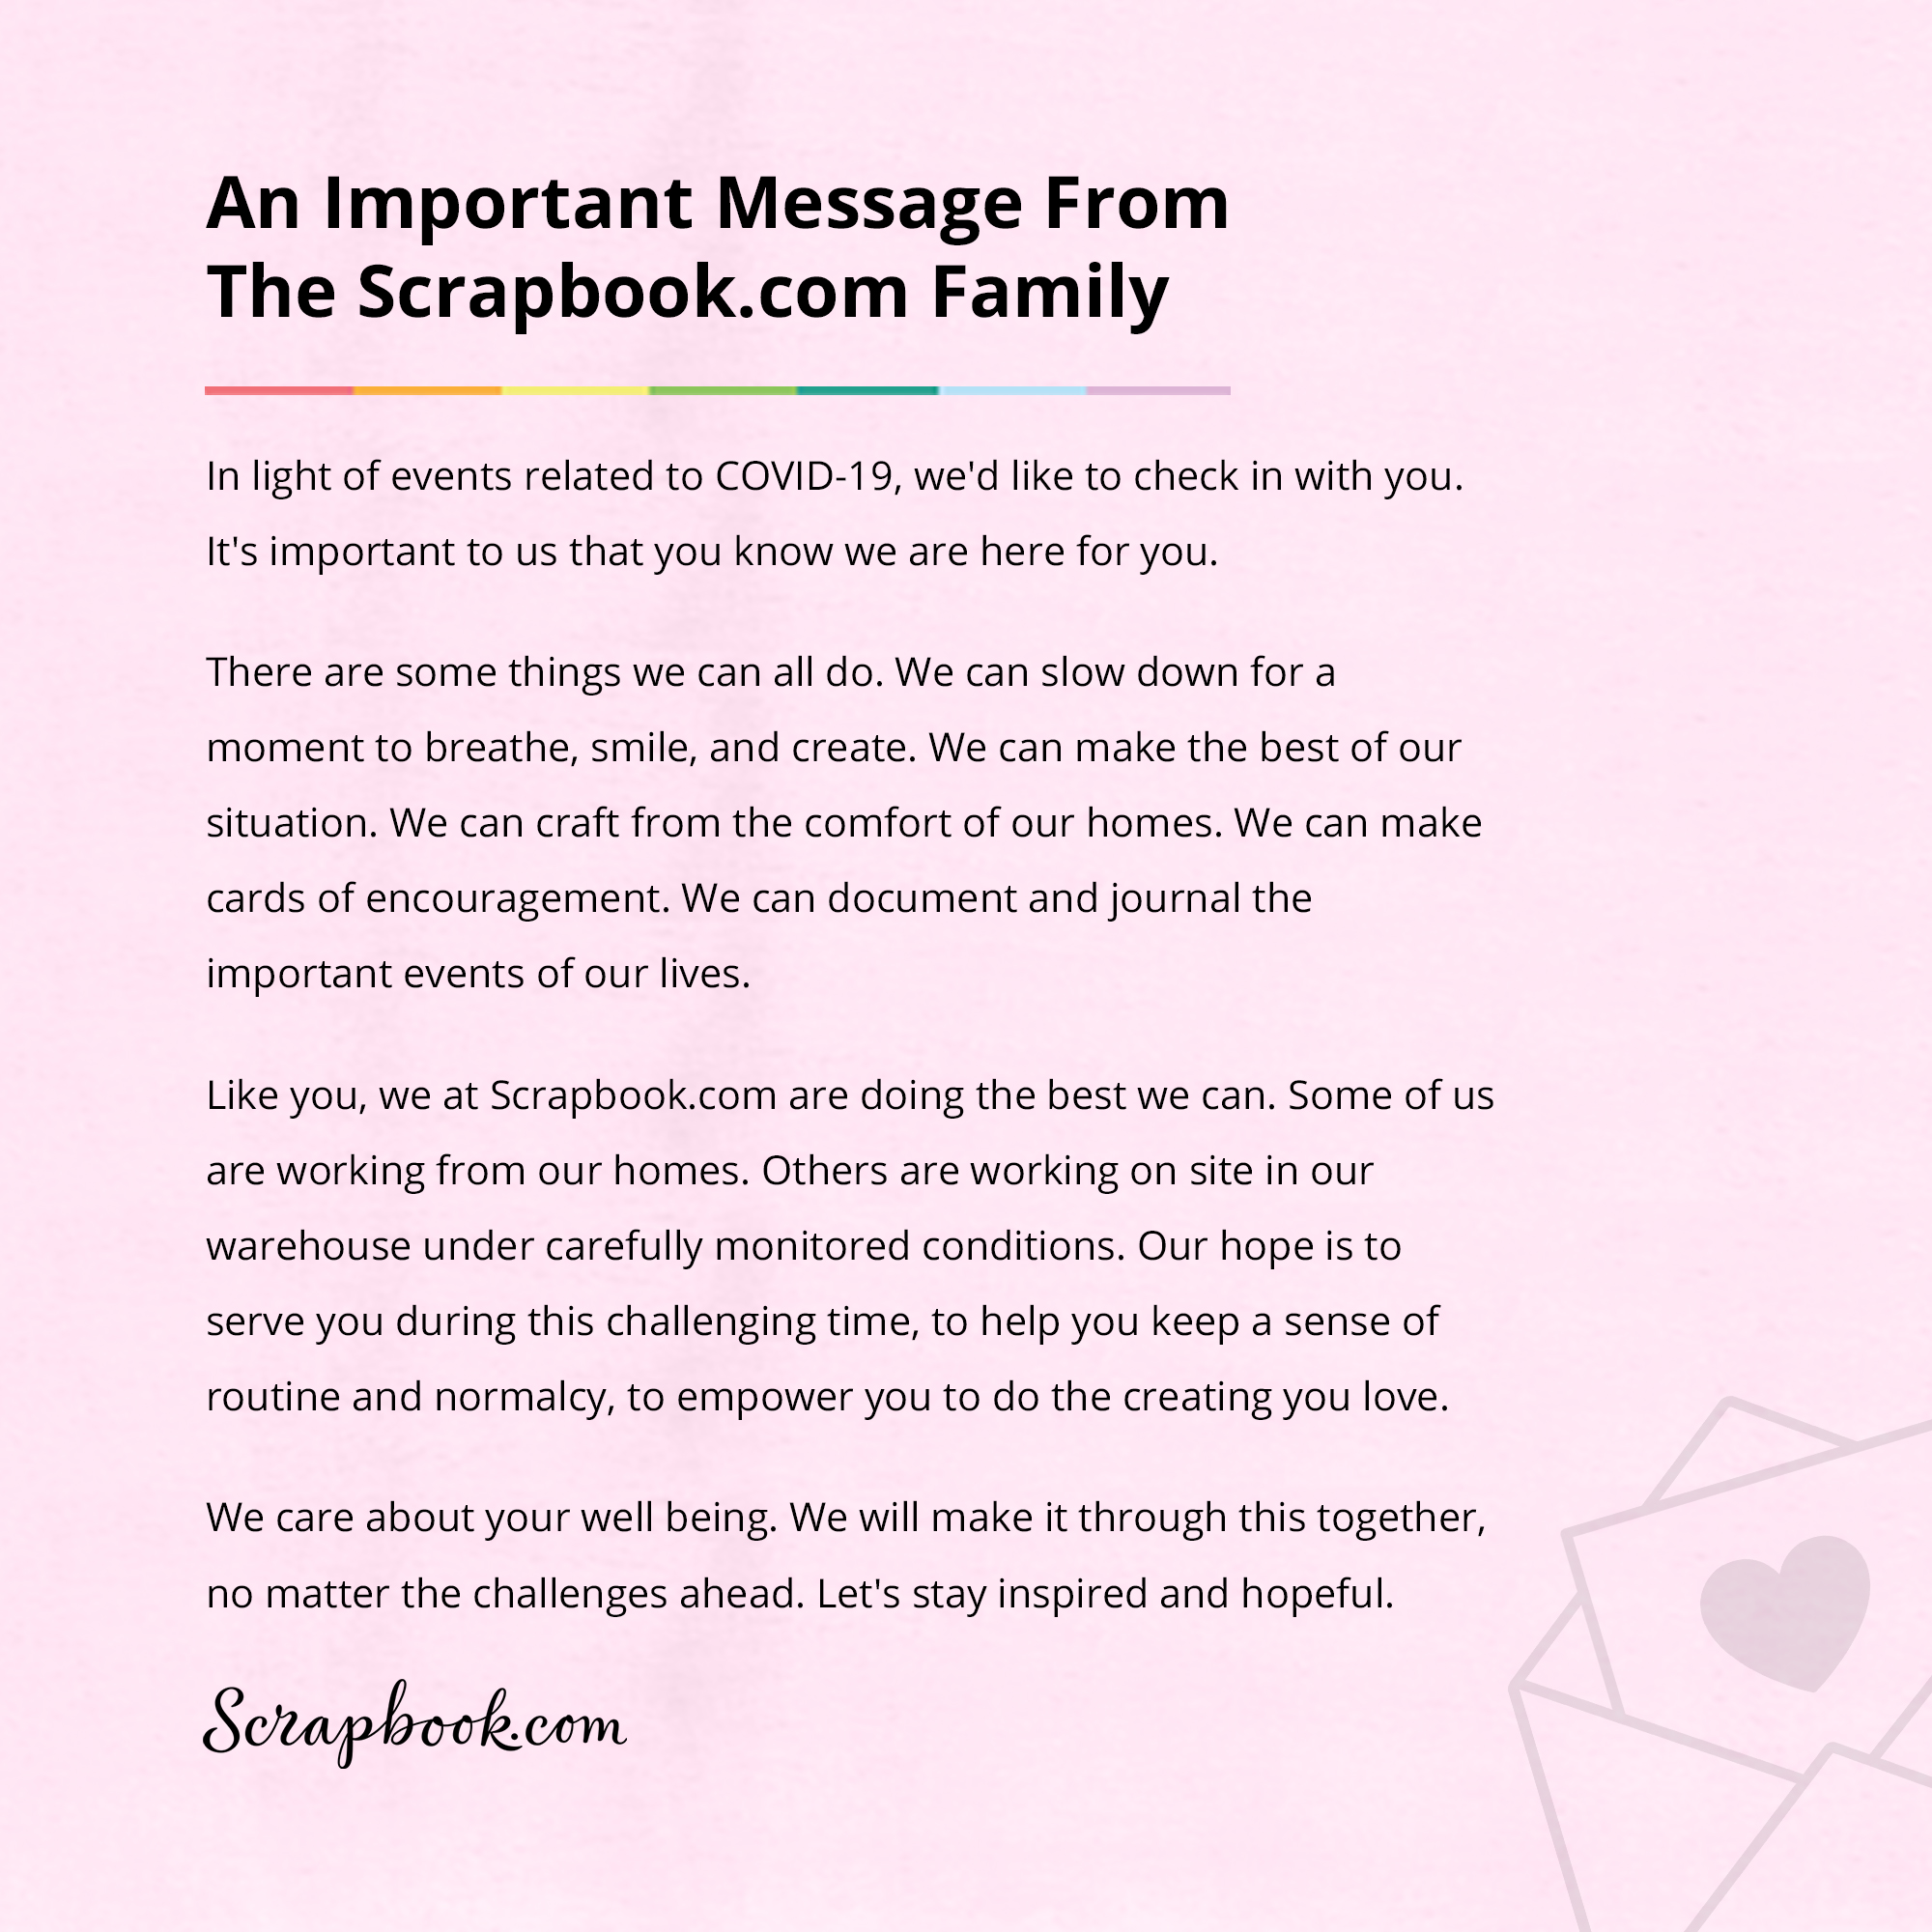 letter from scrapbook.com